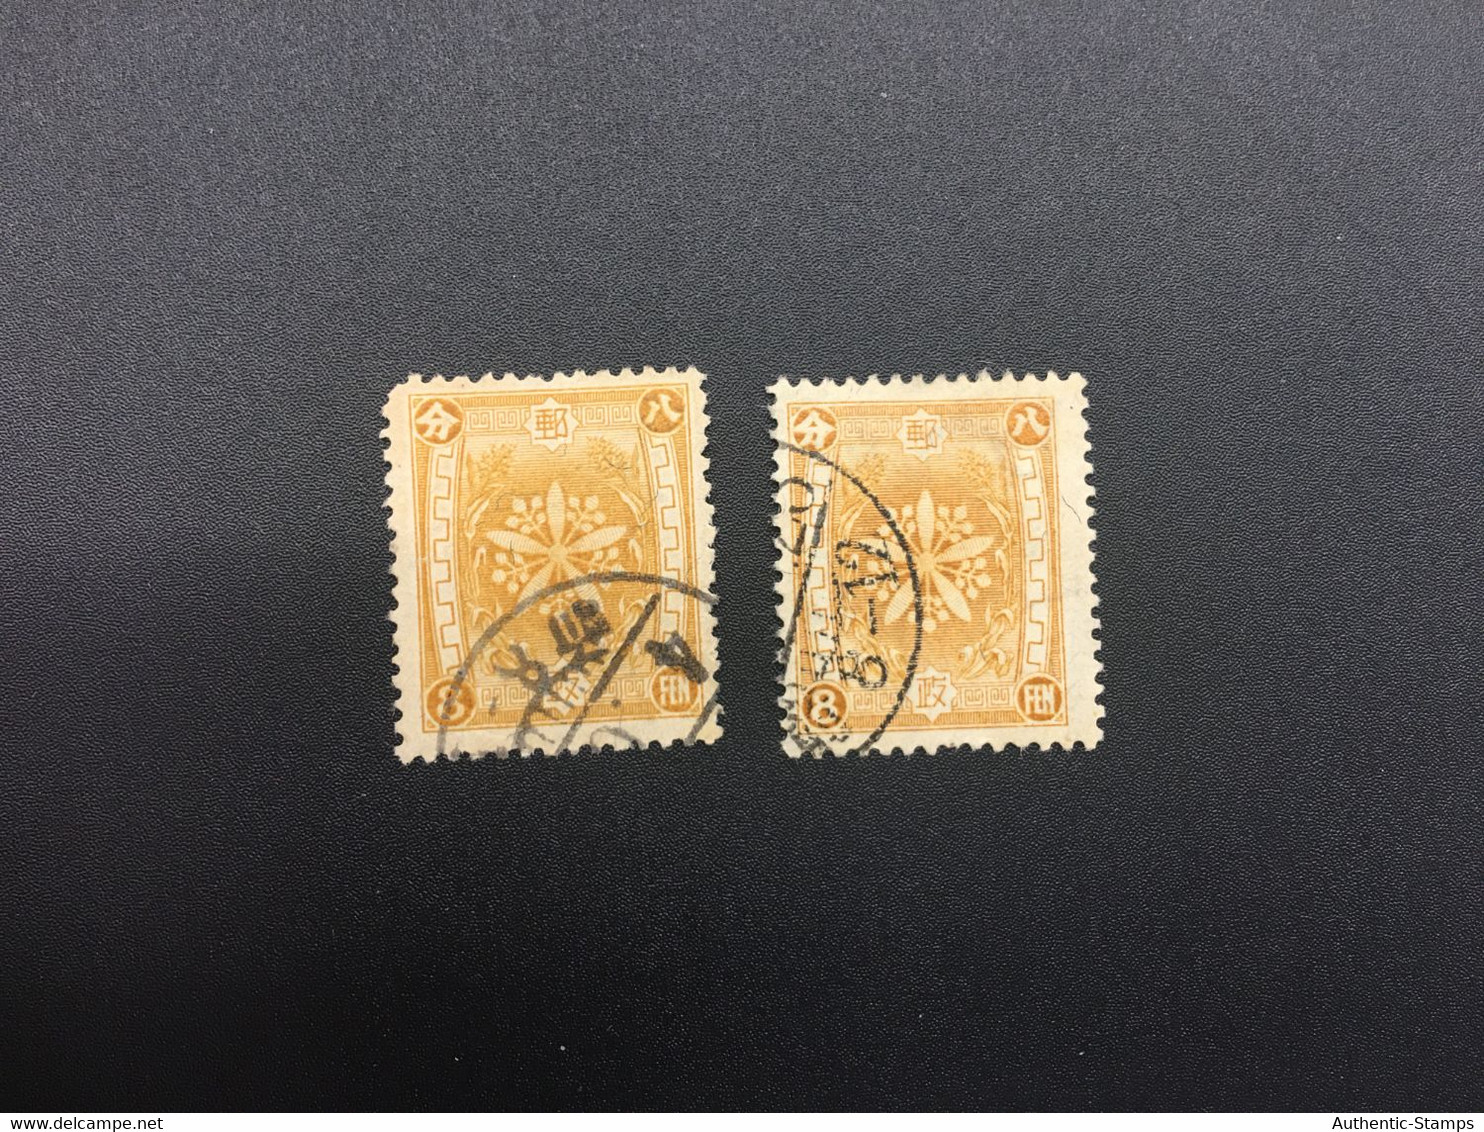 CHINA STAMP,  TIMBRO, STEMPEL,  CINA, CHINE, LIST 8257 - 1932-45 Mandchourie (Mandchoukouo)